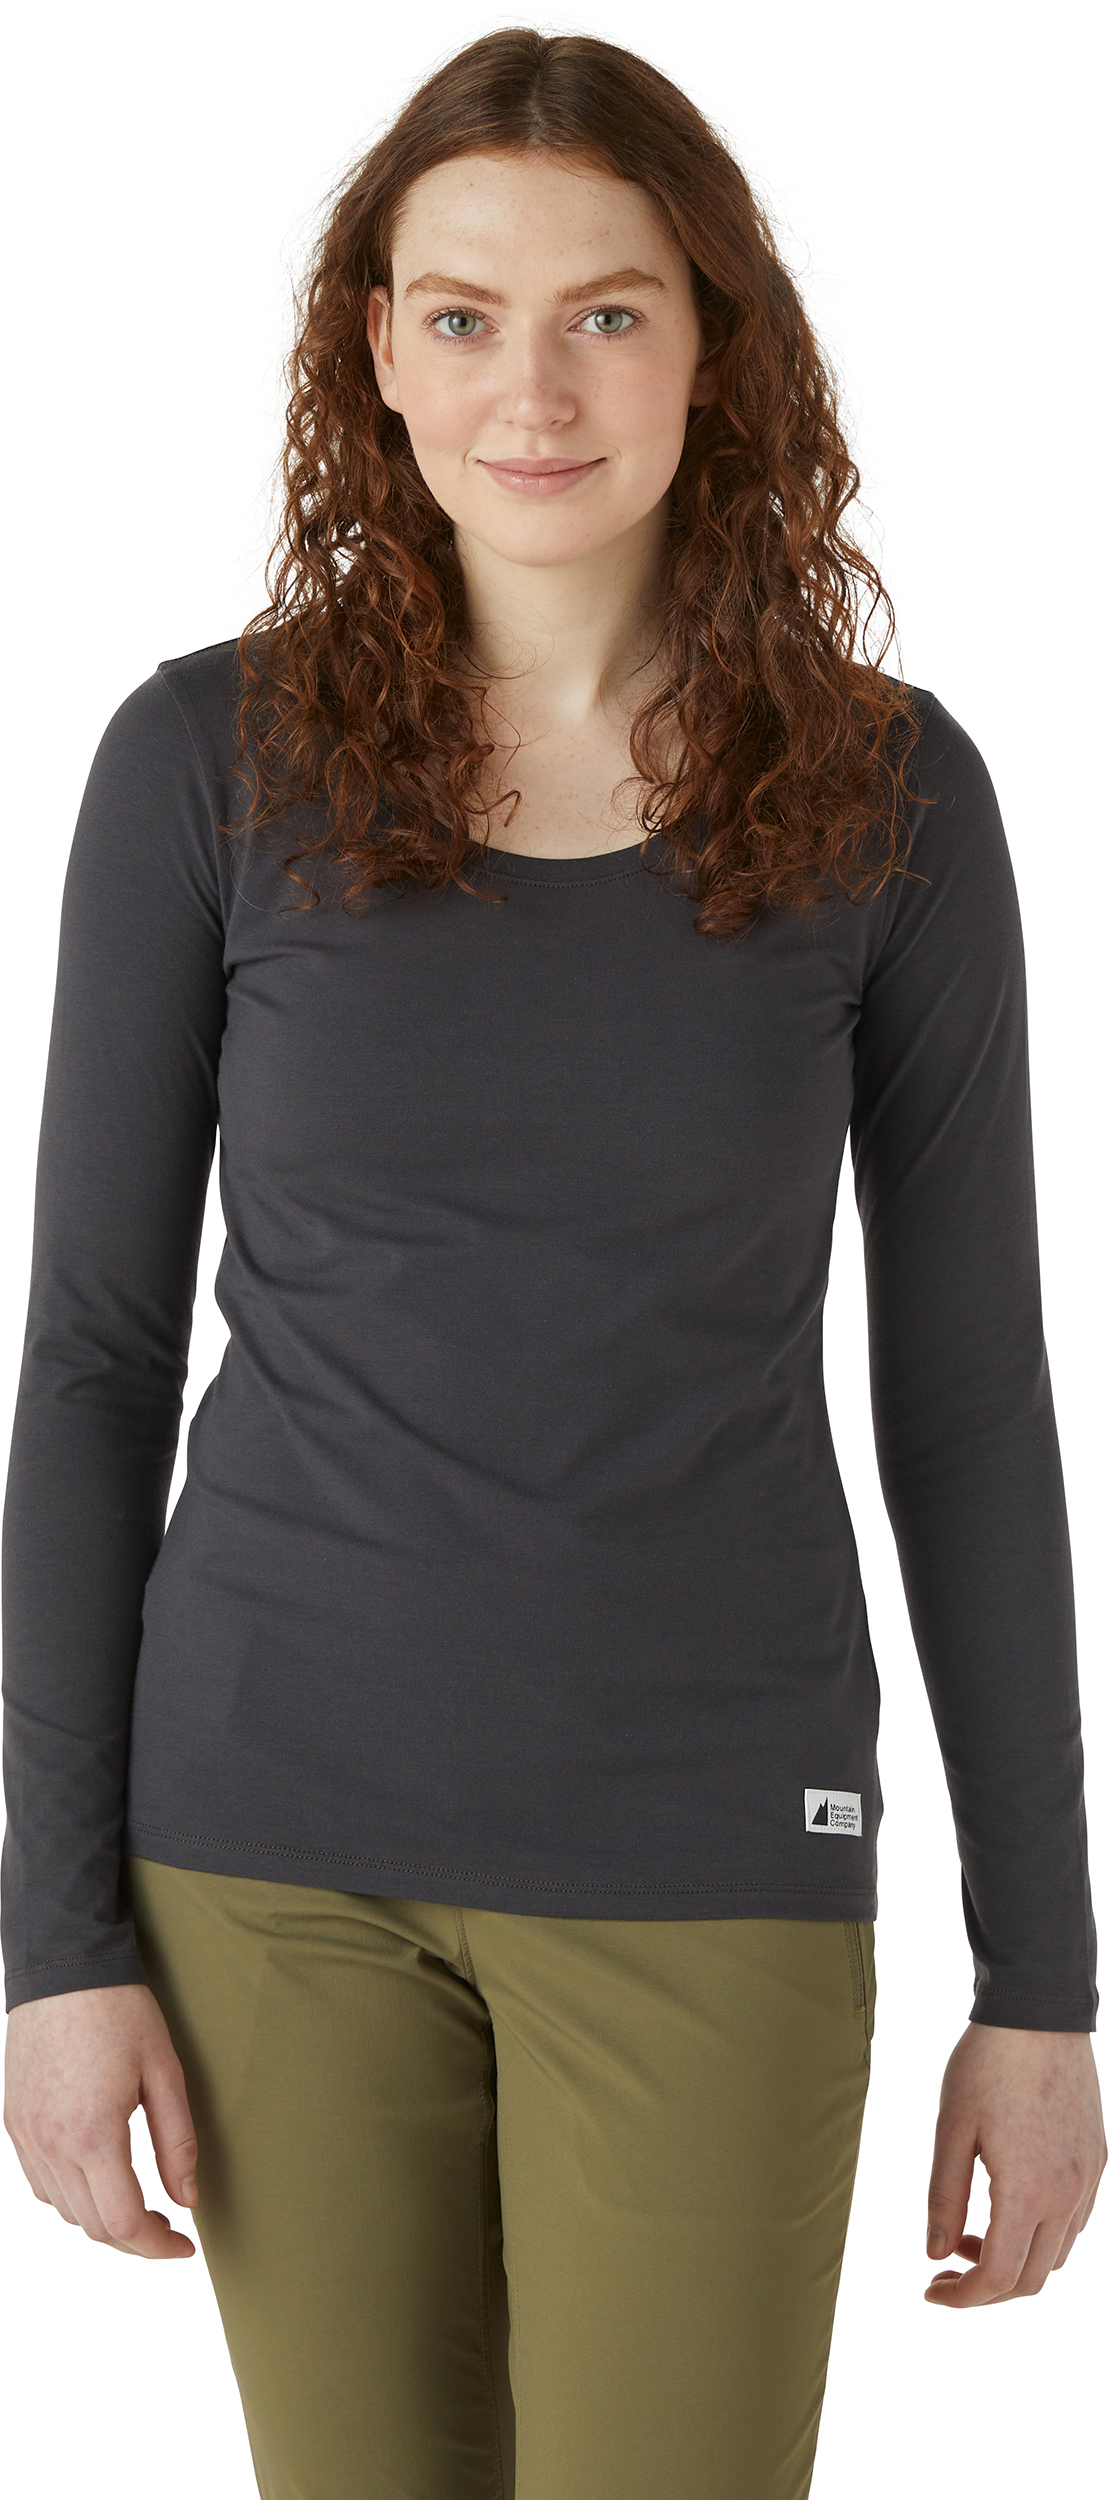 Womens Stretch Long Sleeve Top – Organic Cotton – pink, truffle or